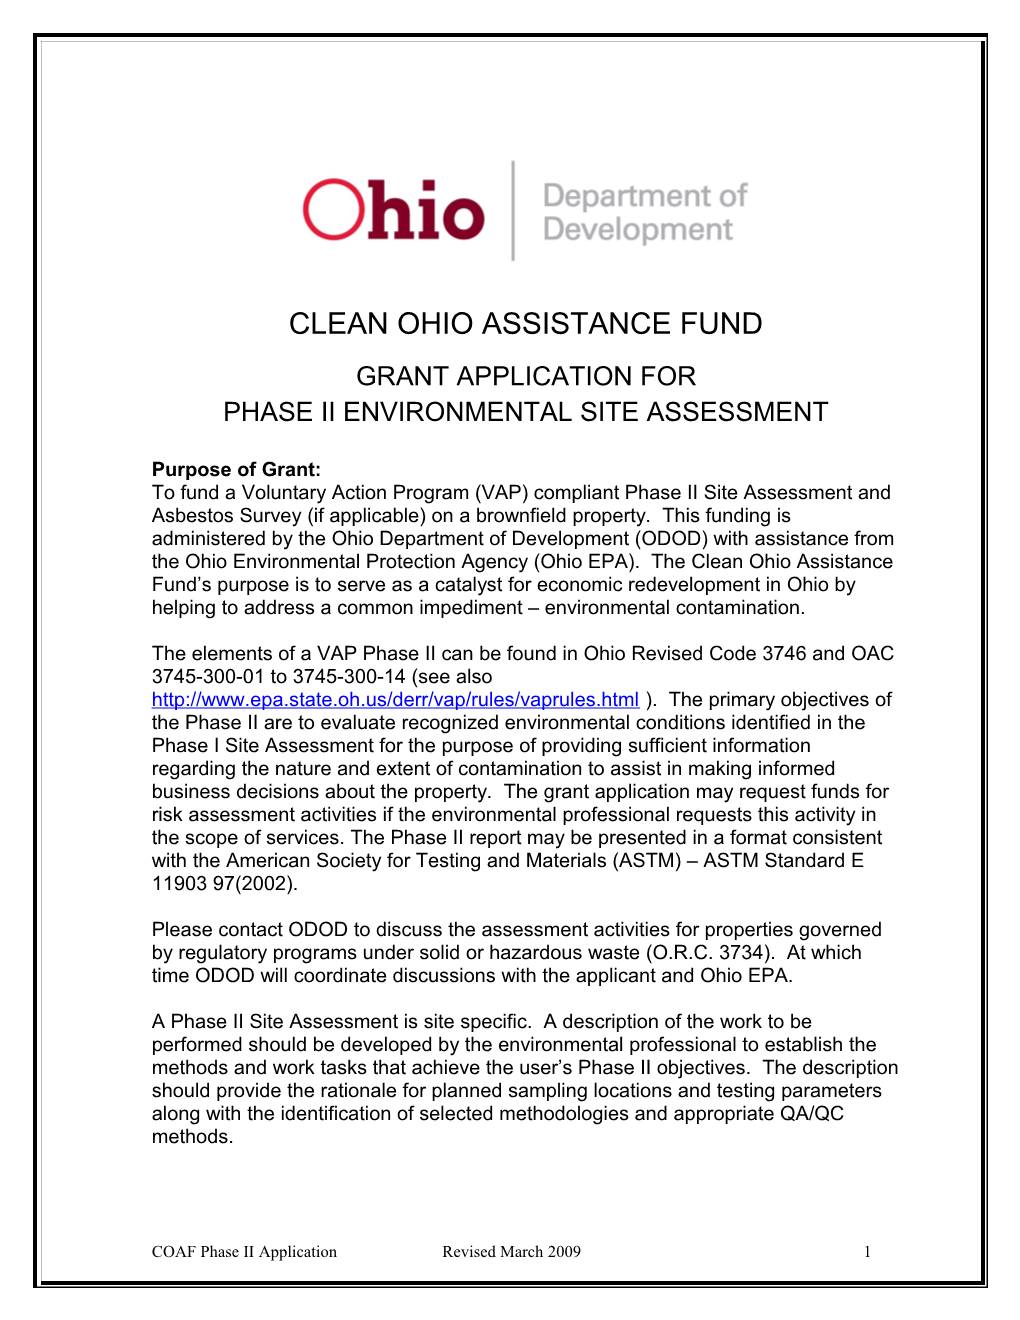 Clean Ohio Assistance Fund